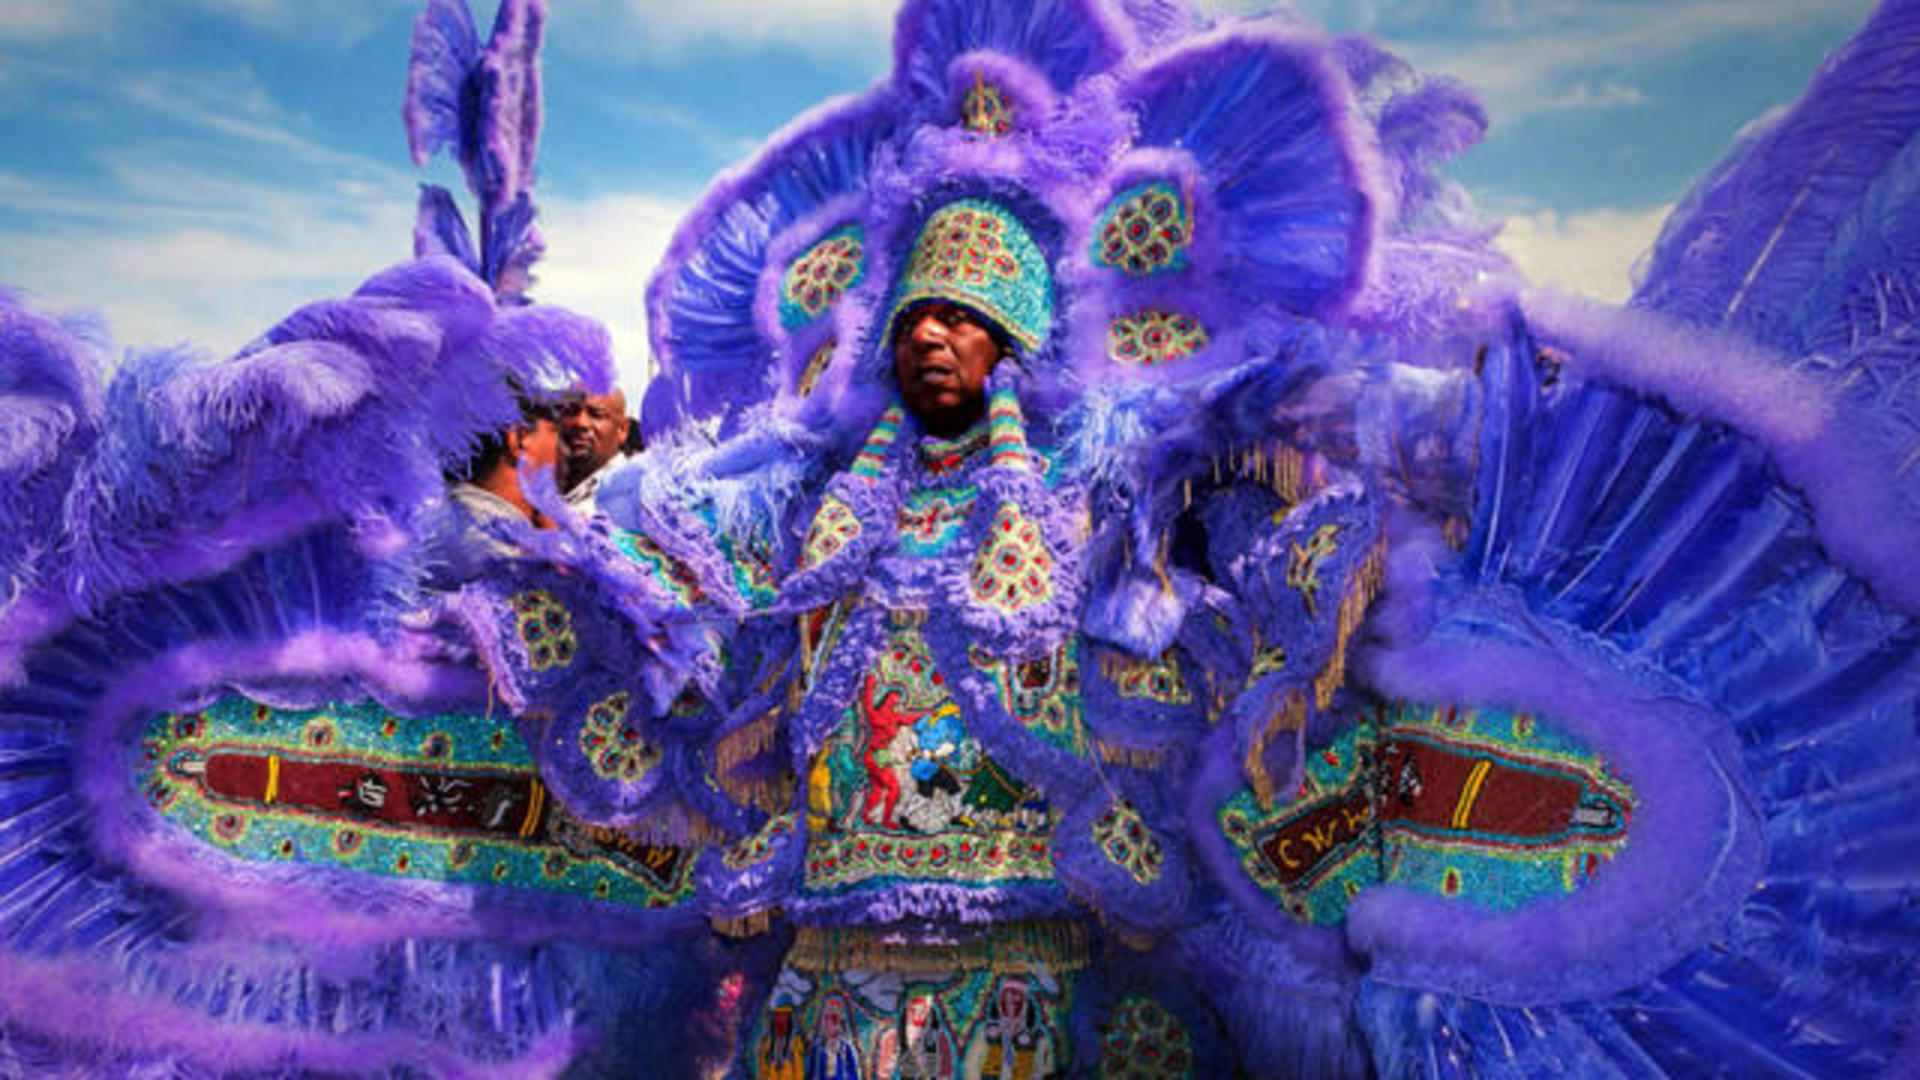 The history of Super Sunday and the Mardi Gras Indians picture